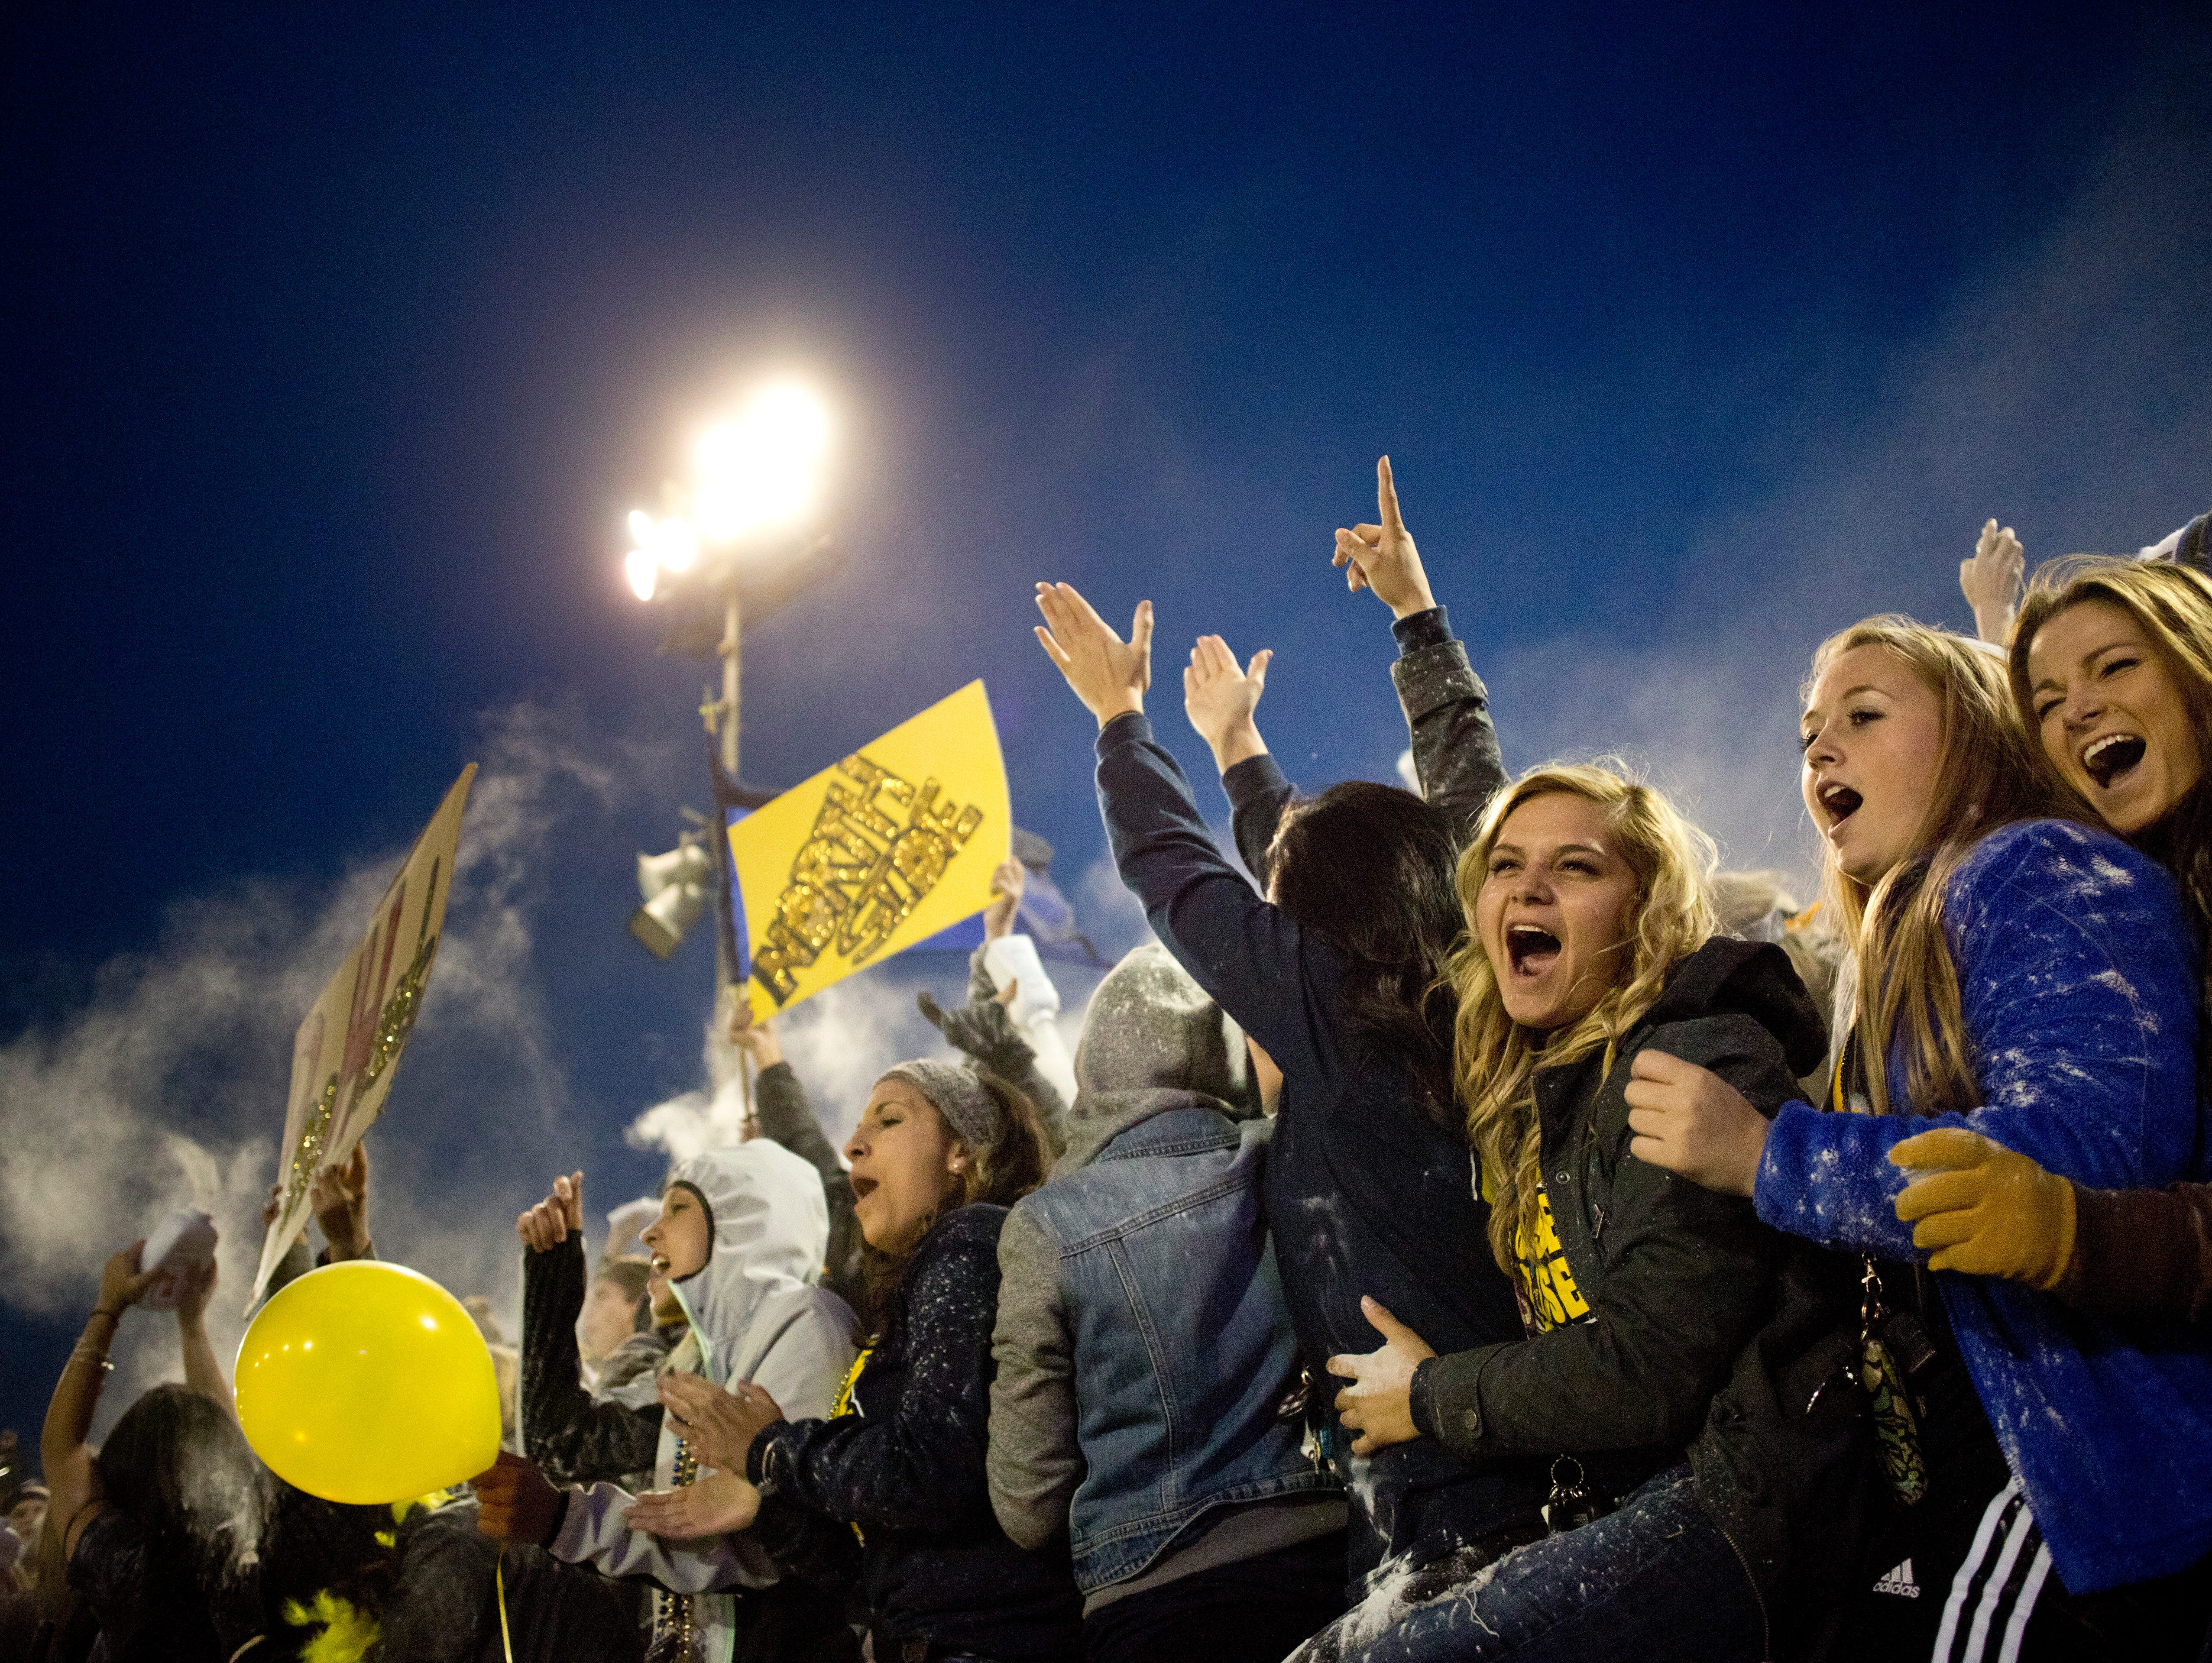 Port Huron Northern students cheer and throw baby powder in the air as the team takes the field during the Crosstown Showdown Friday, October 23, 2015 at Memorial Stadium in Port Huron.